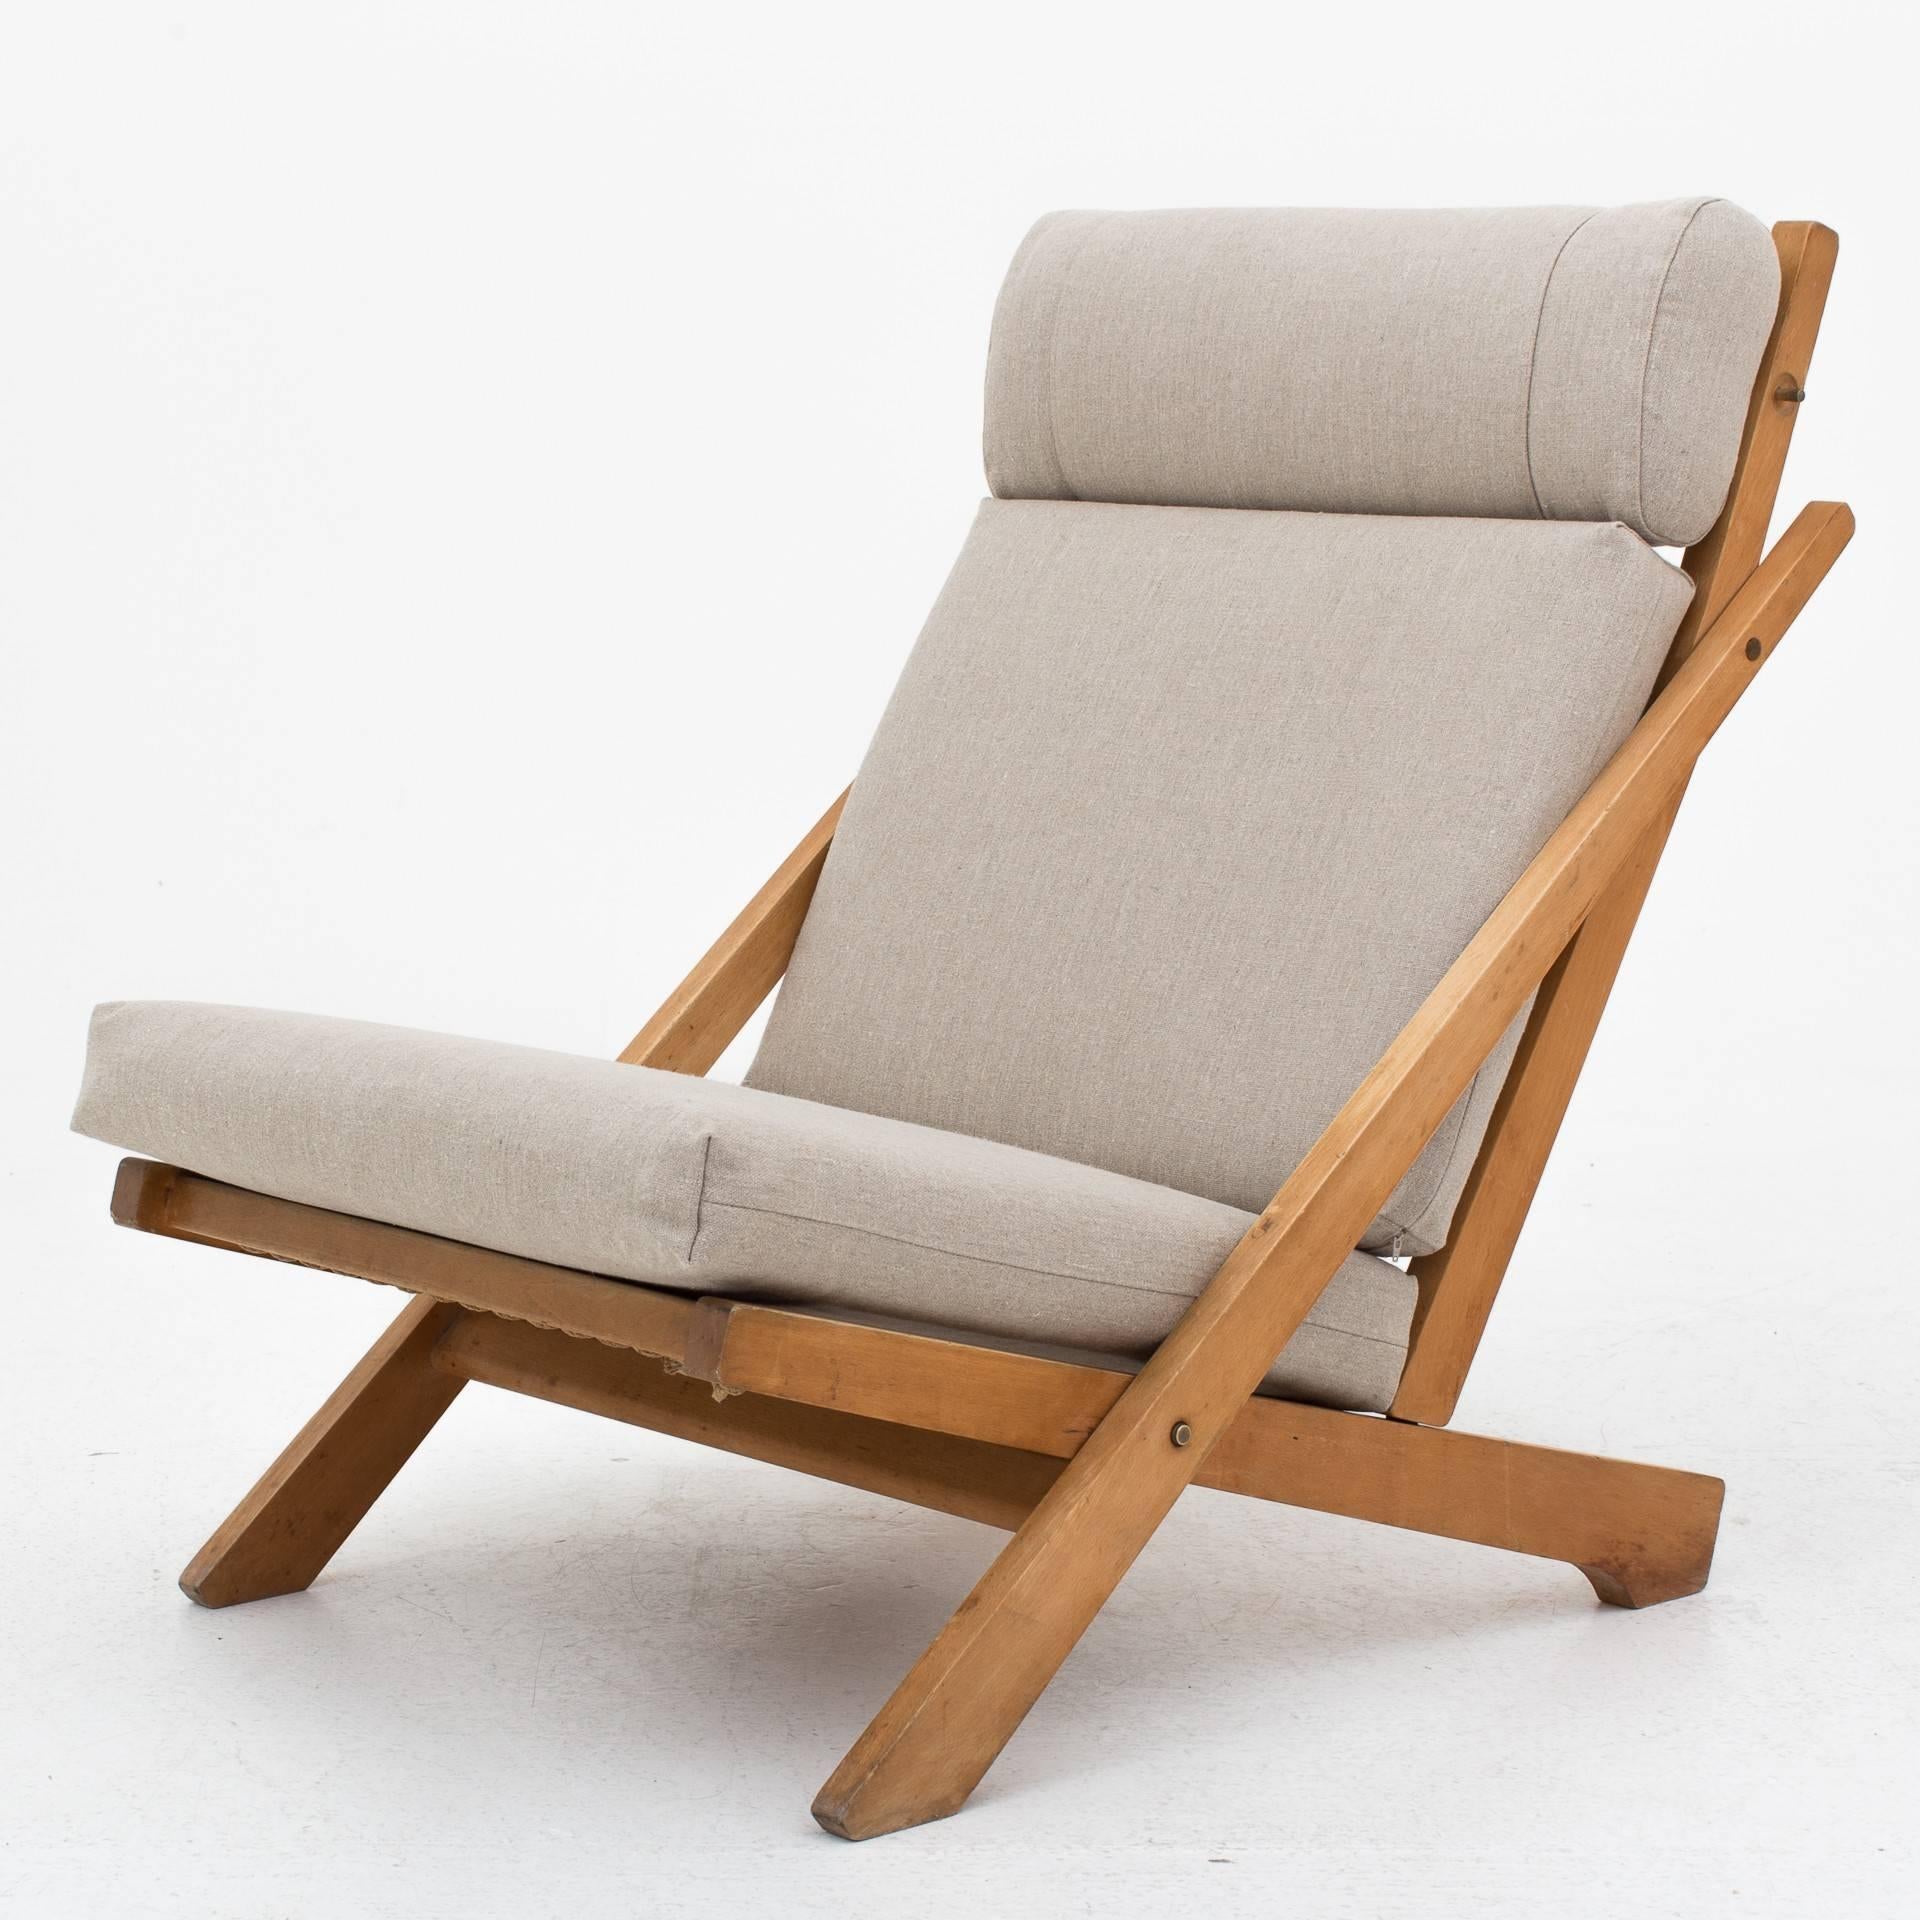 CH 3 - pair of lounge chairs in beech and new cushions in washed canvas. Maker Carl Hansen & Son.